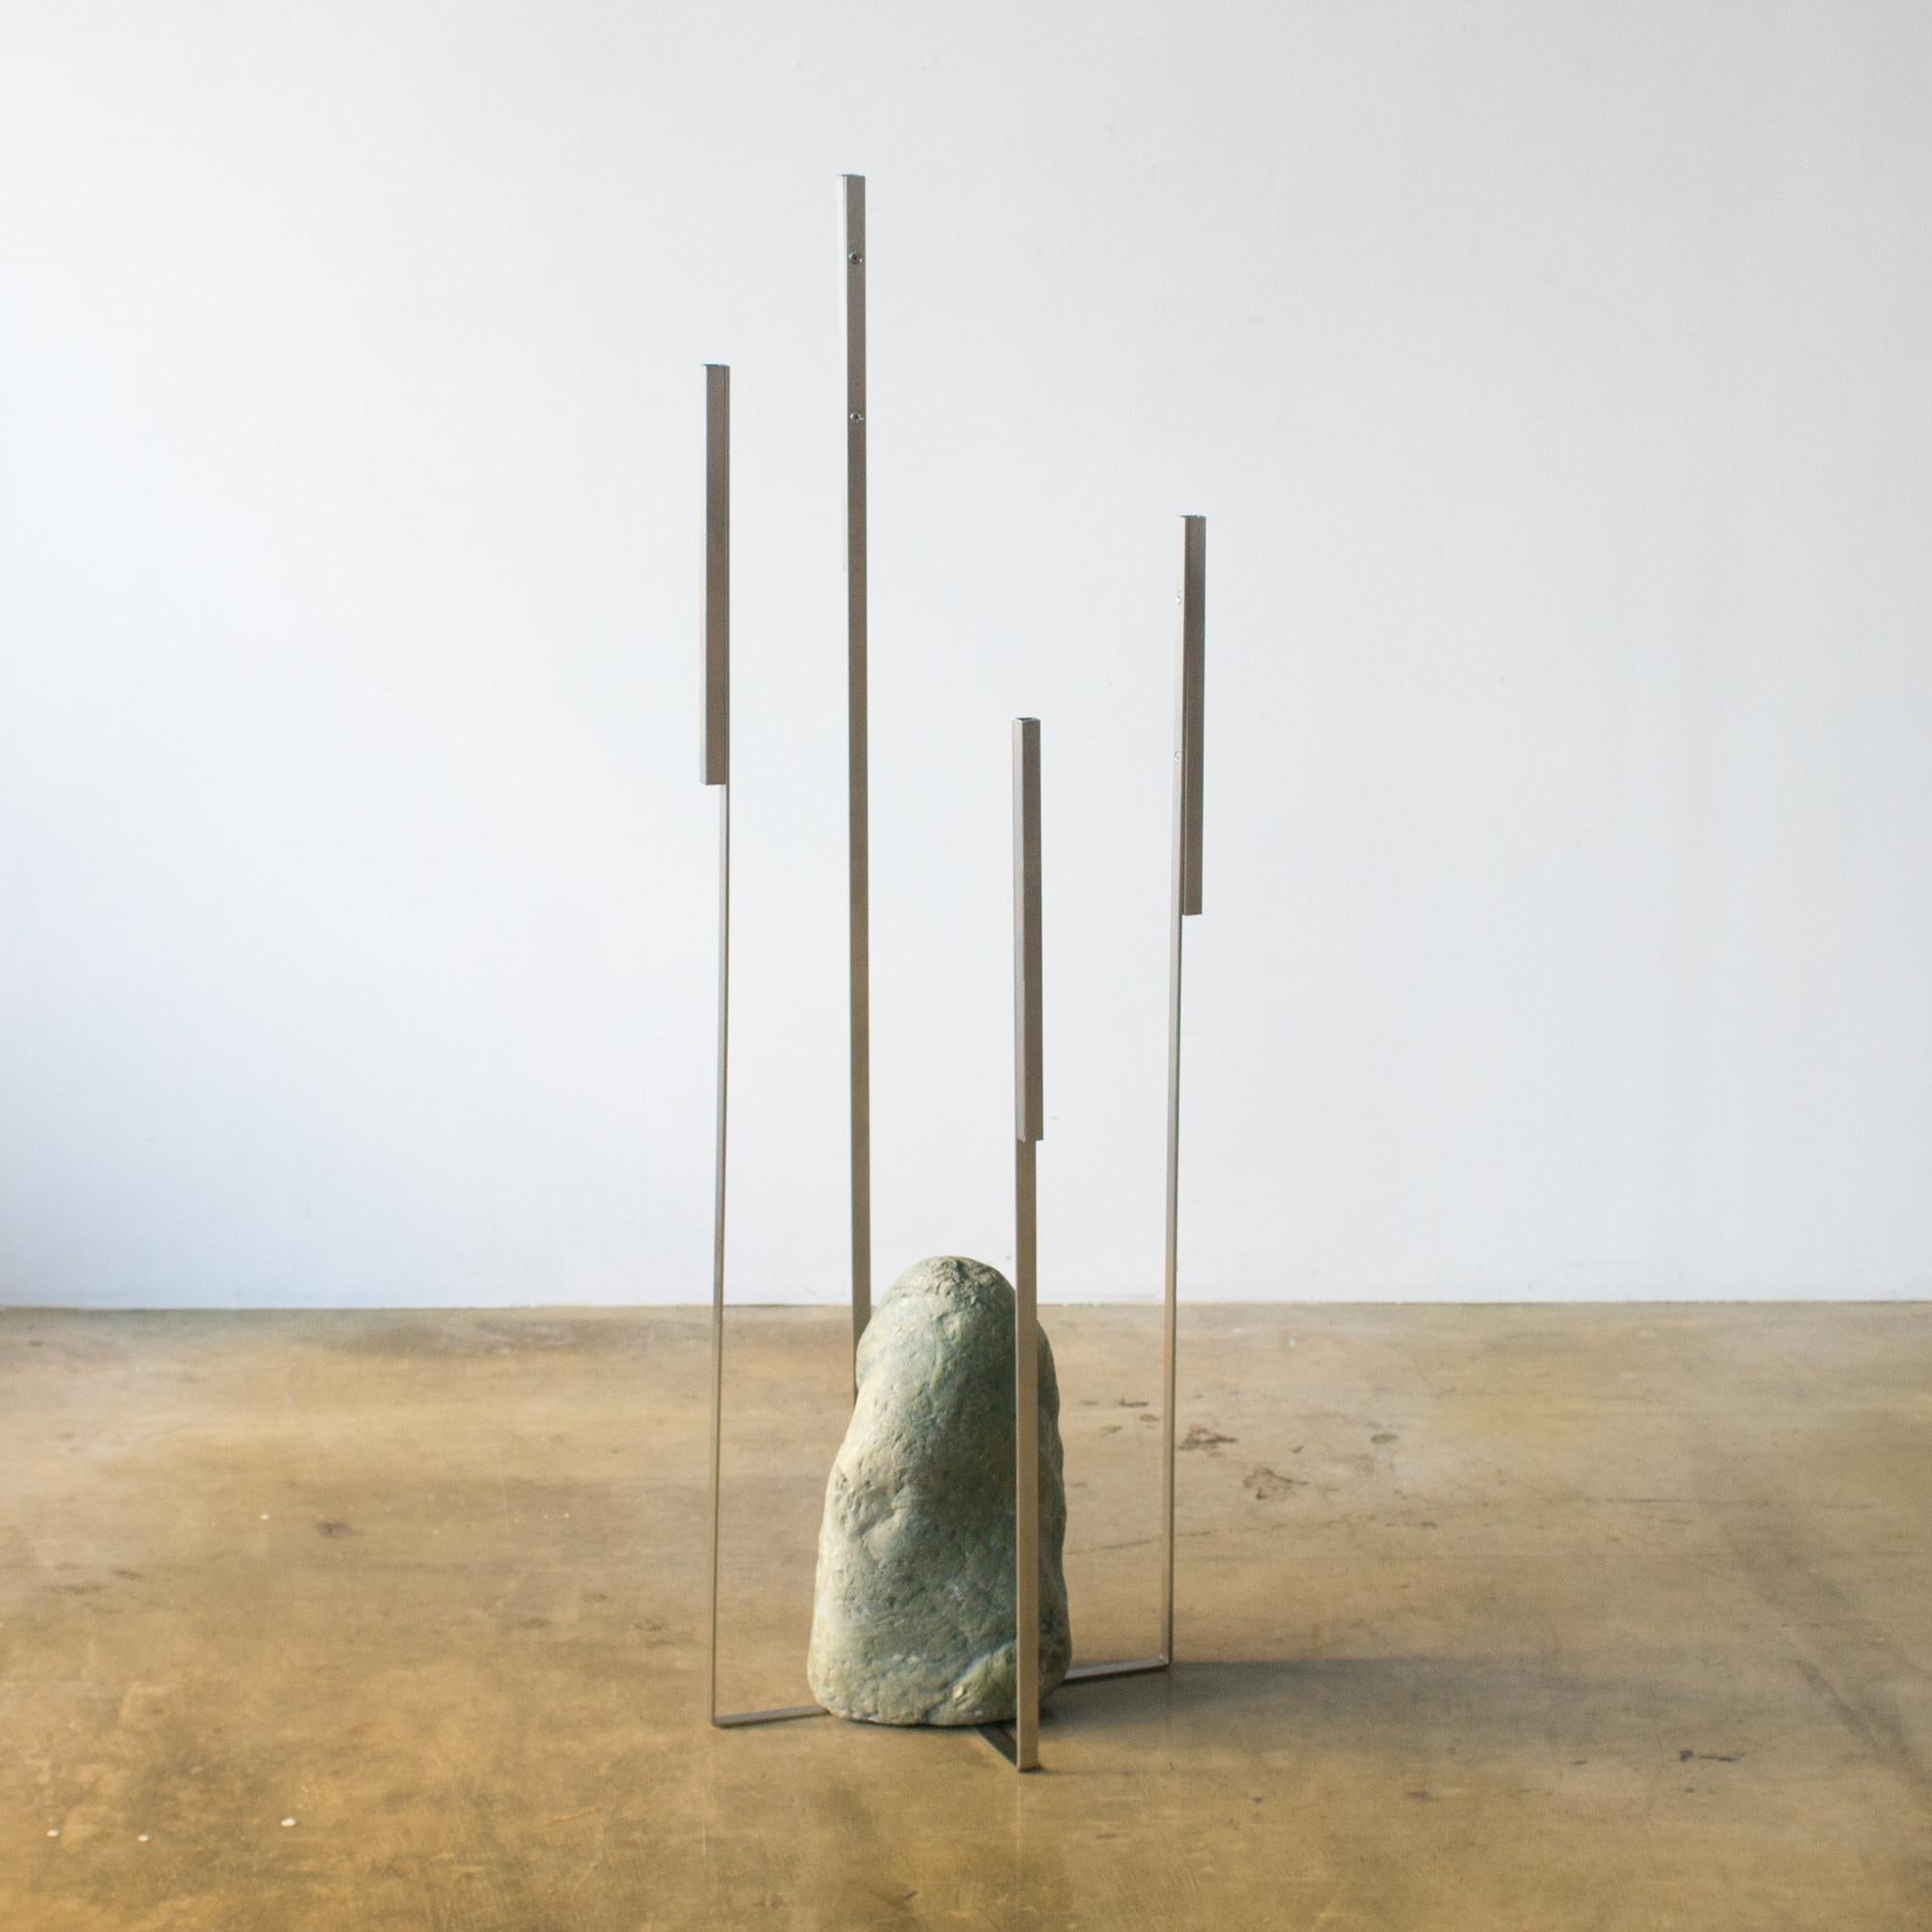 Sculpture or sculptural vase for dried flowers designed by Batten and Kamp.
Minimal structure furniture made of stainless steel and natural stone.
 